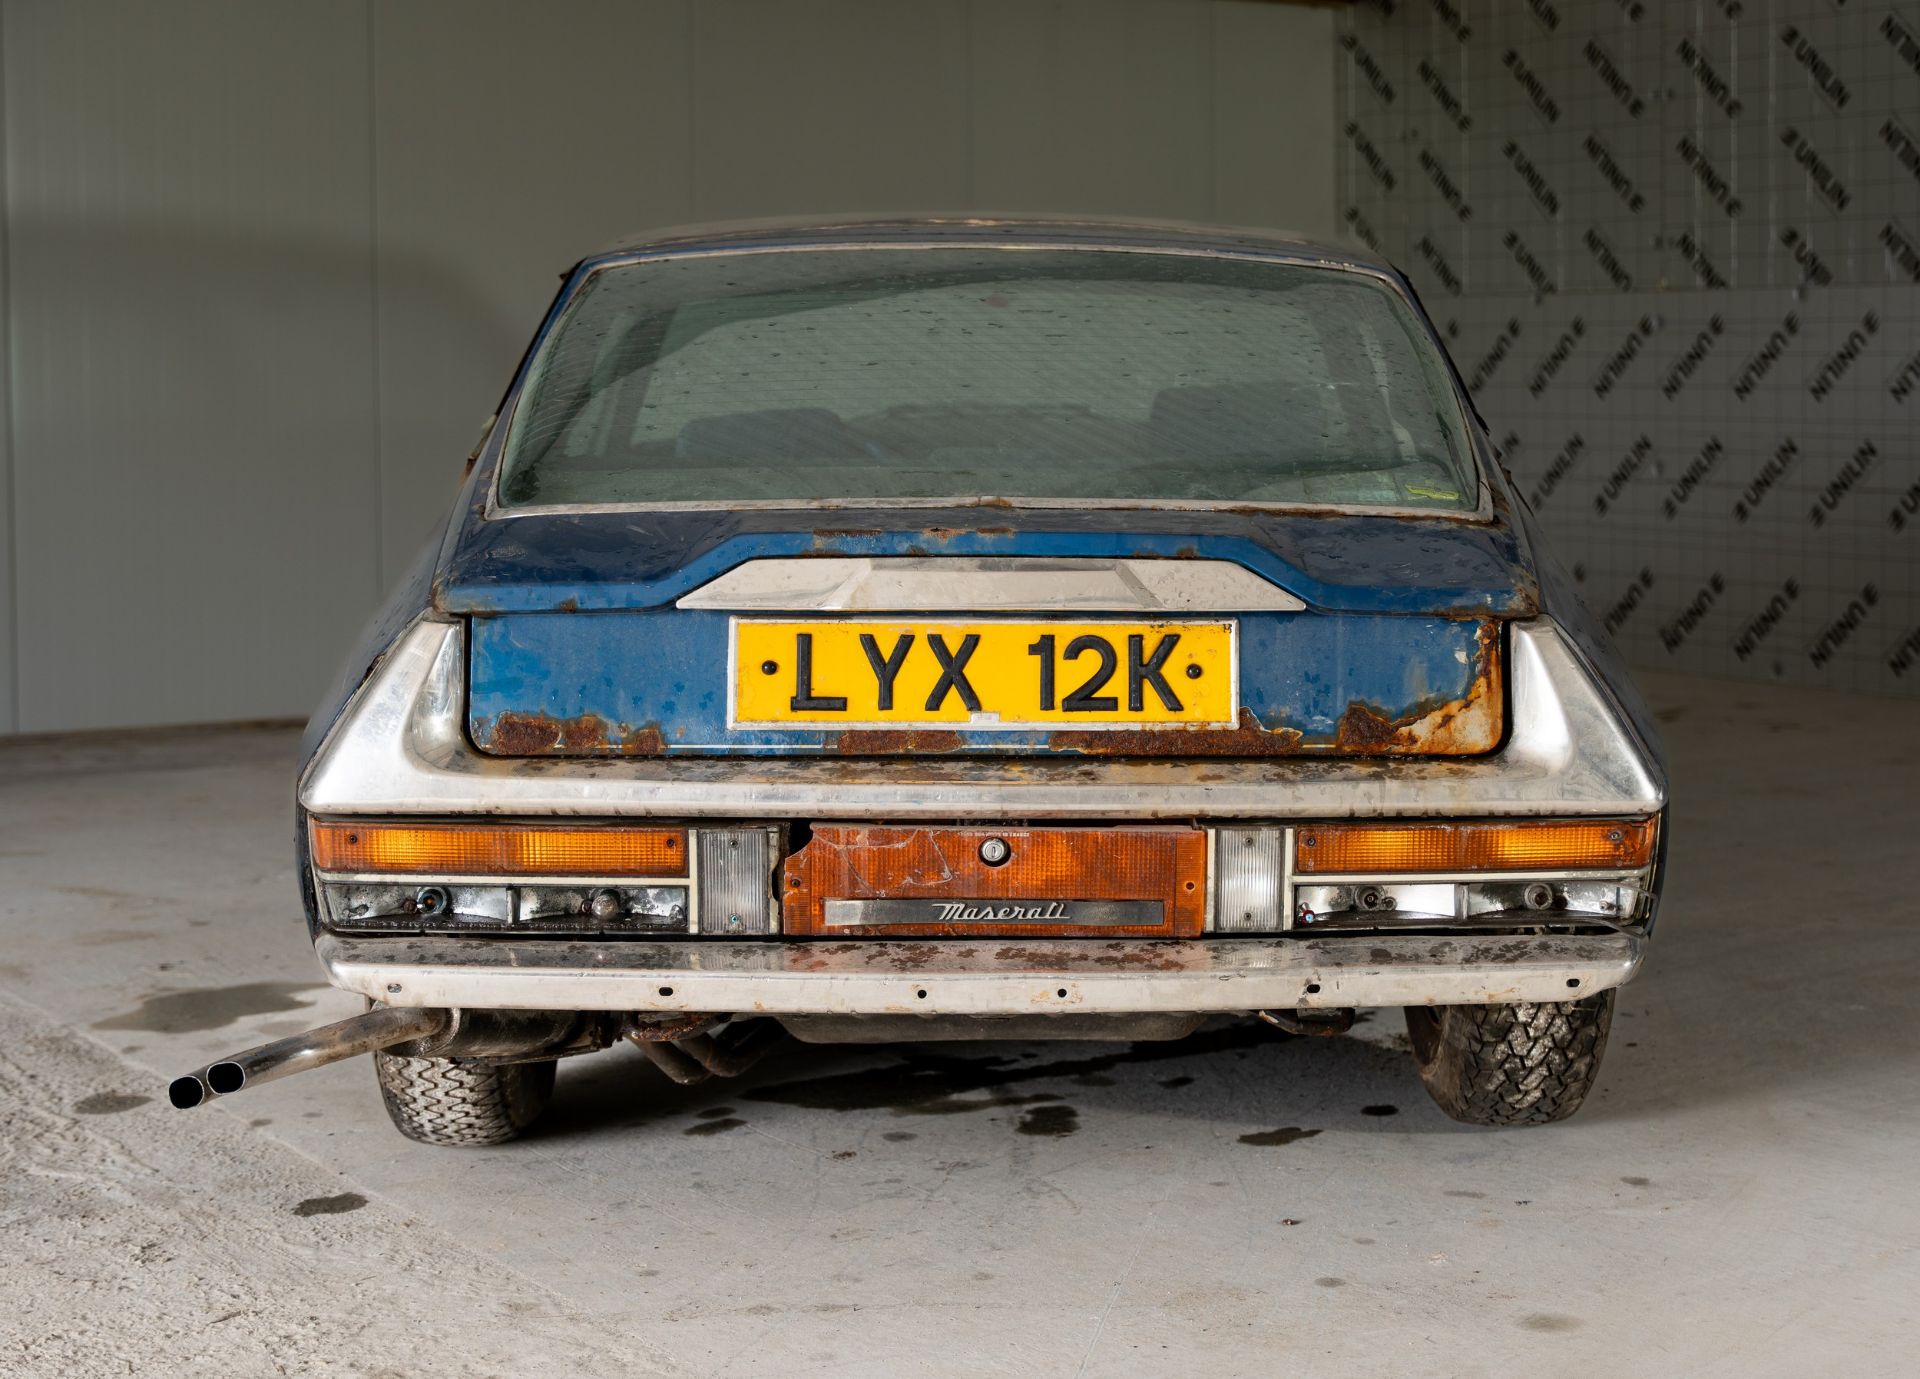 1971 CITROEN SM Registration Number: LYX 12K Chassis Number: 00SB5906 Recorded Mileage: 26,187 miles - Image 5 of 26